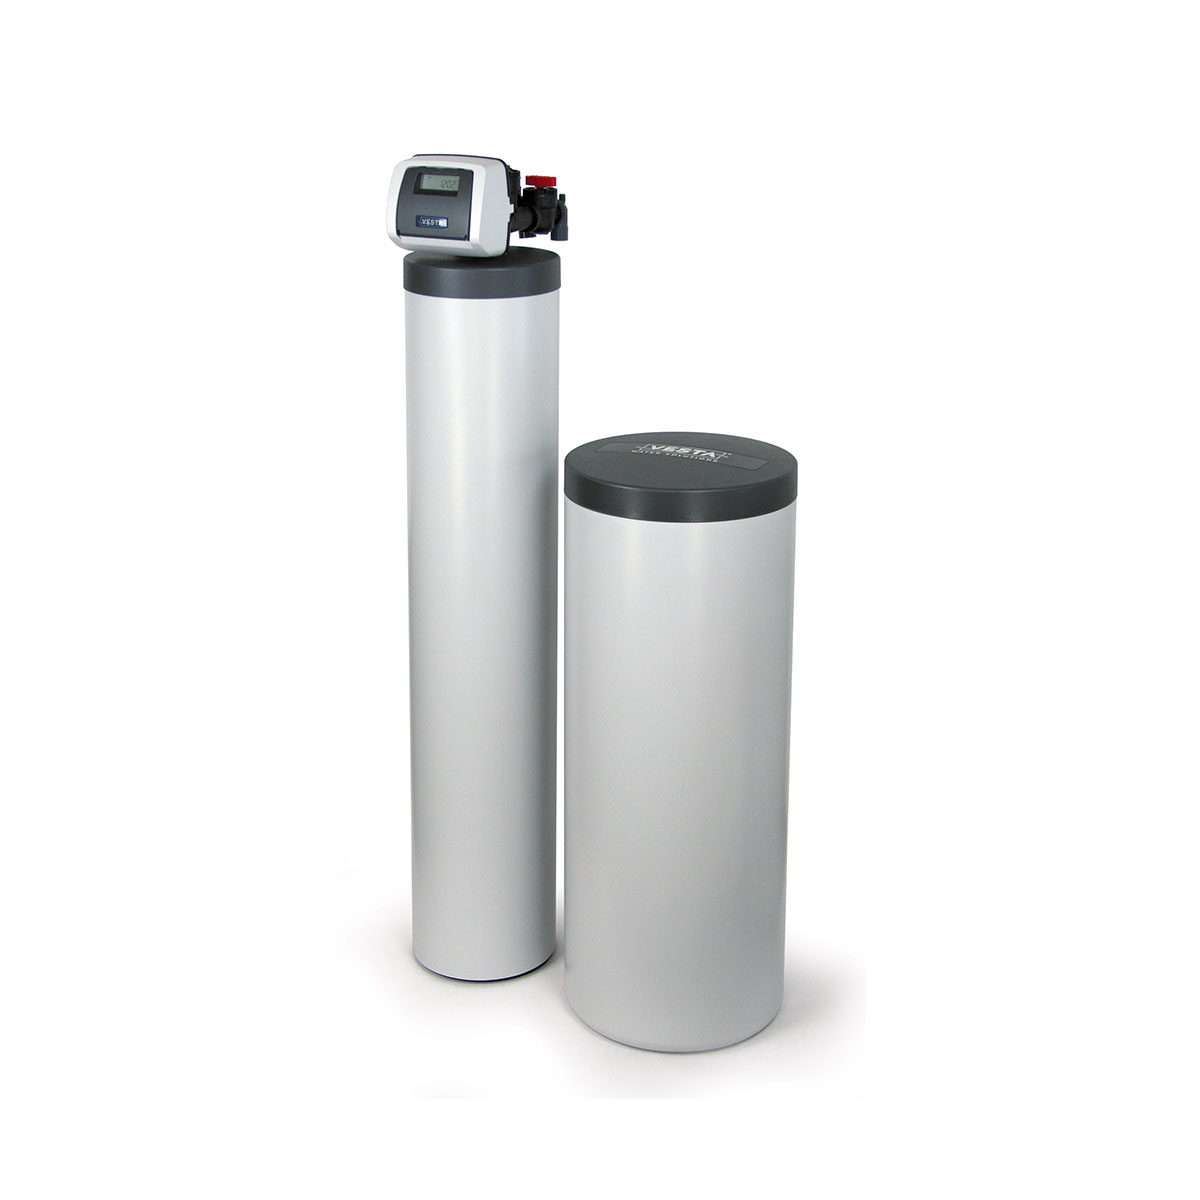 Portable Water Softener Ft Defiance Industries W Wheeled Steel Chassis  PWS-0001